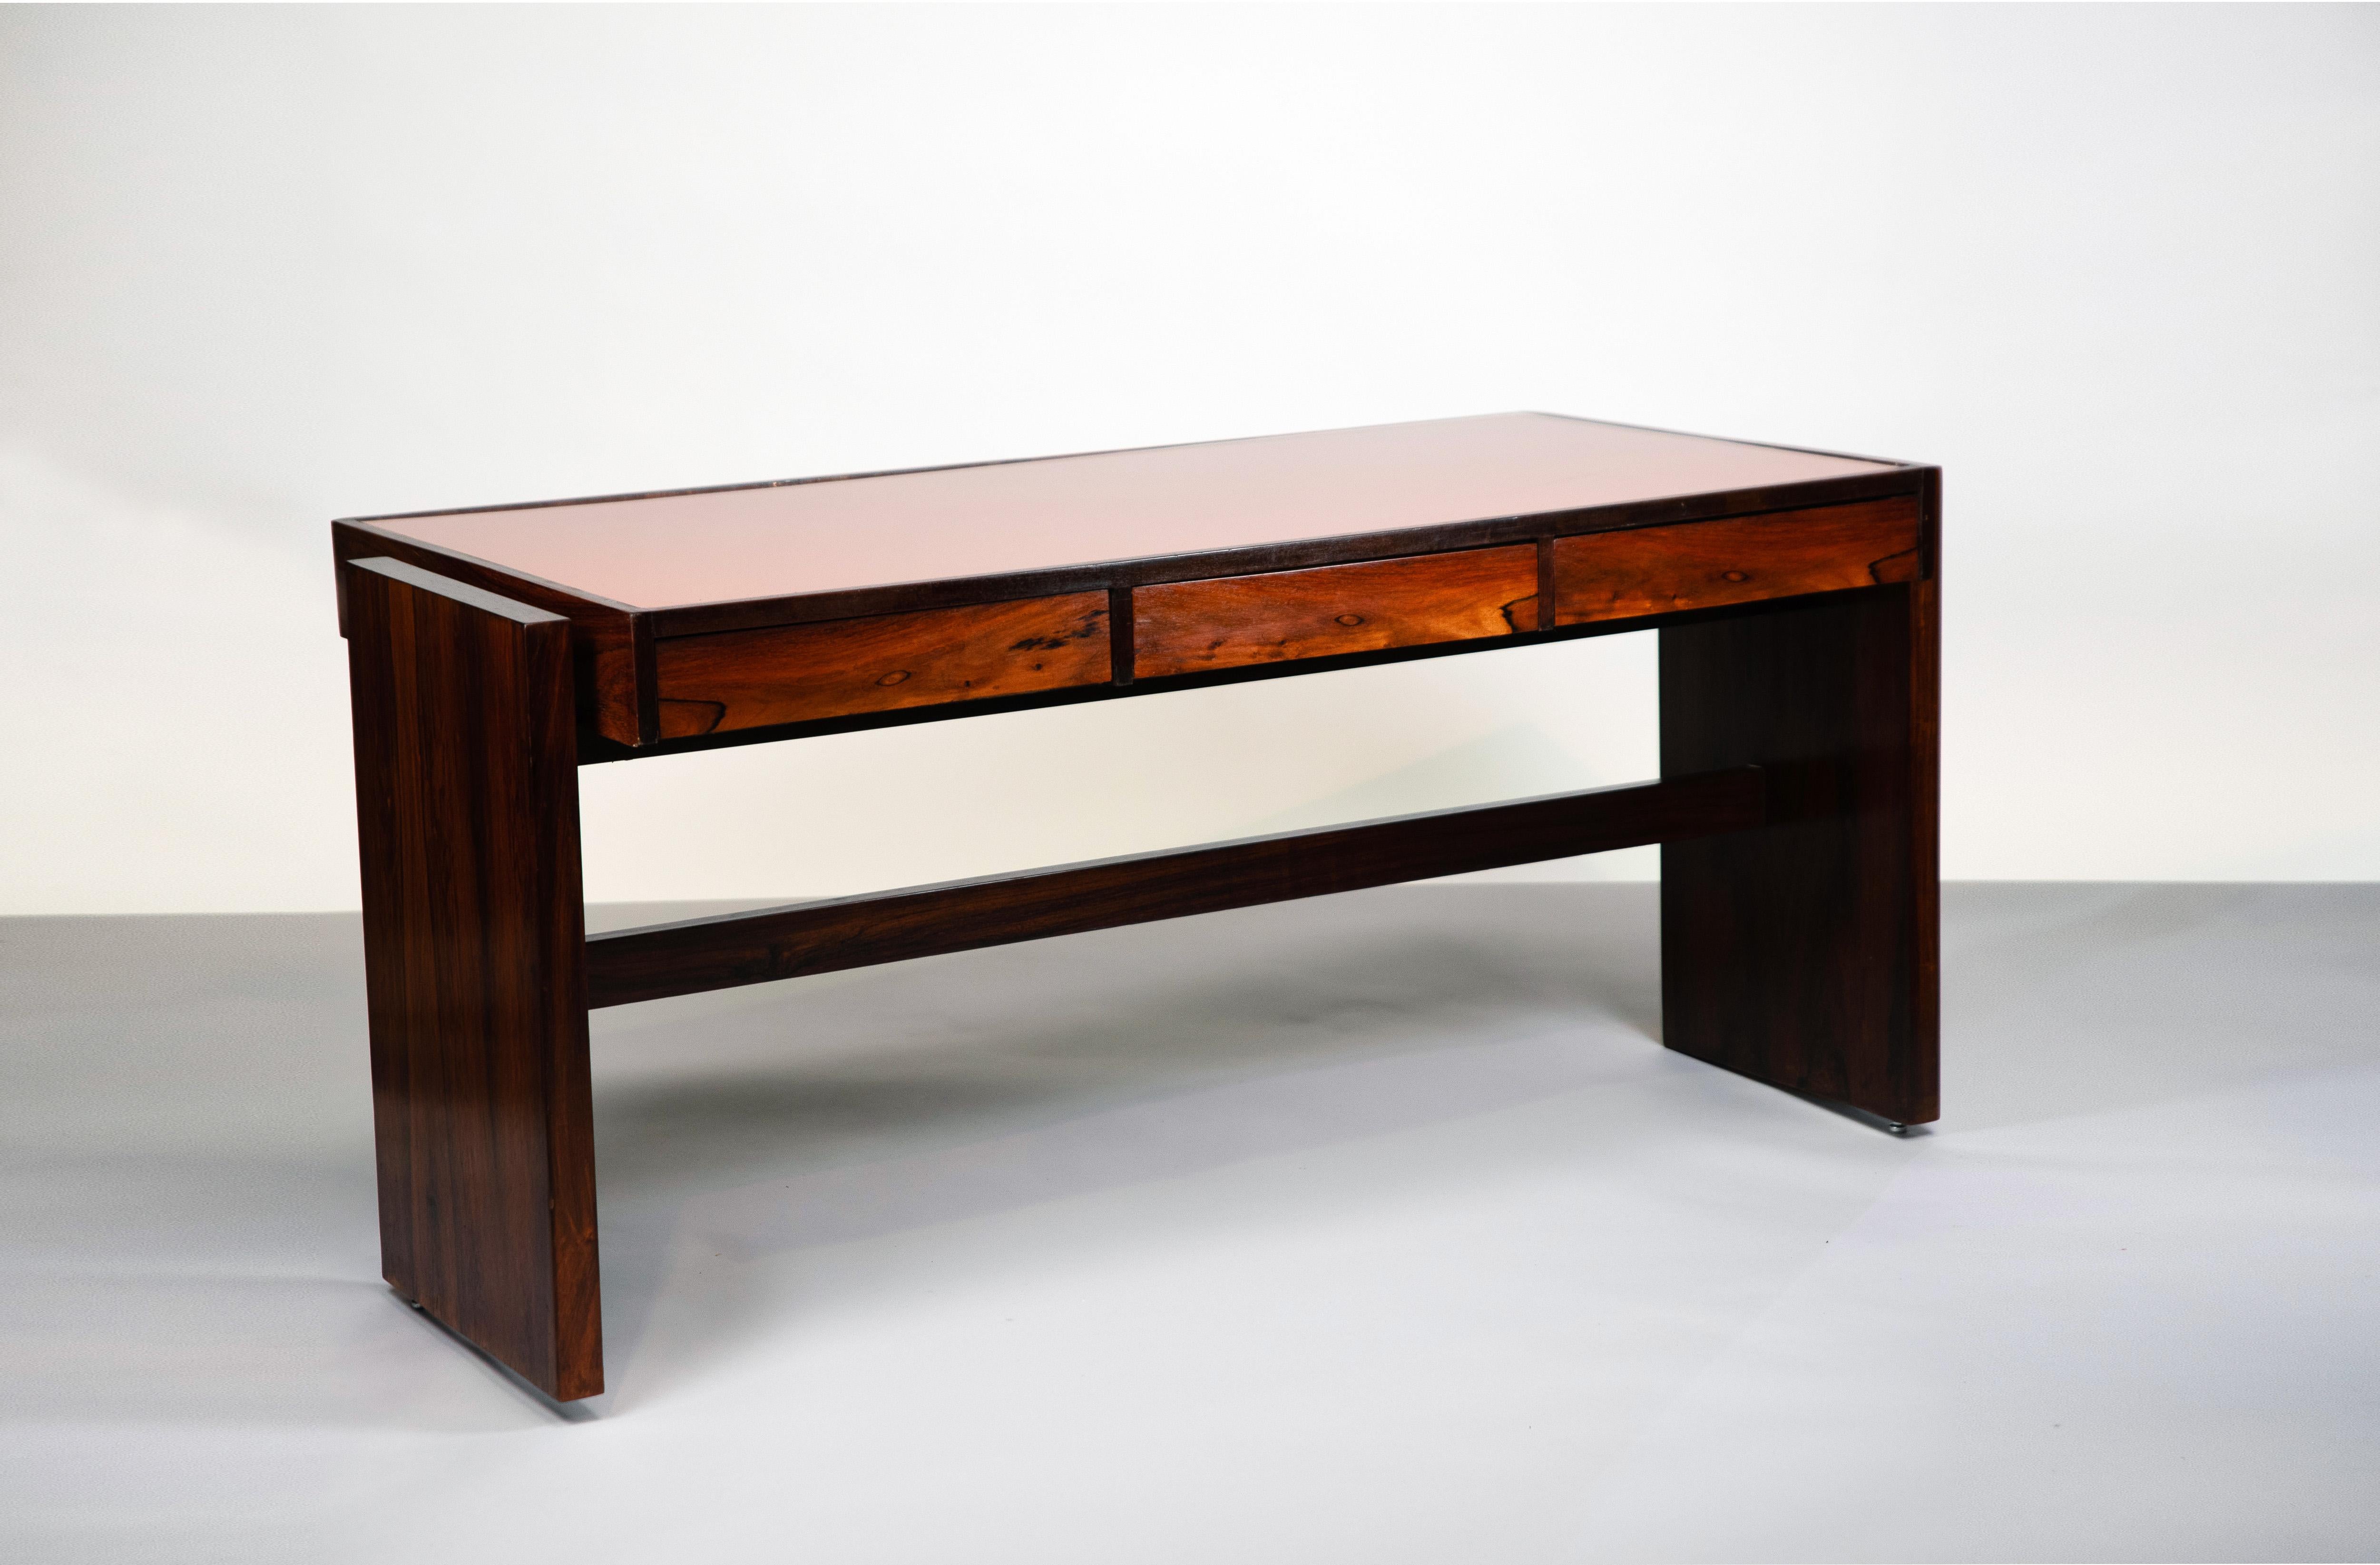 Desk in solid wood and wood veneer with three drawers resting on two straight legs in solid wood and attempted glass top in orange color. Desktop created specifically for Bloch Editors. Brazil, circa 1966 created in 1956 for a special order for the